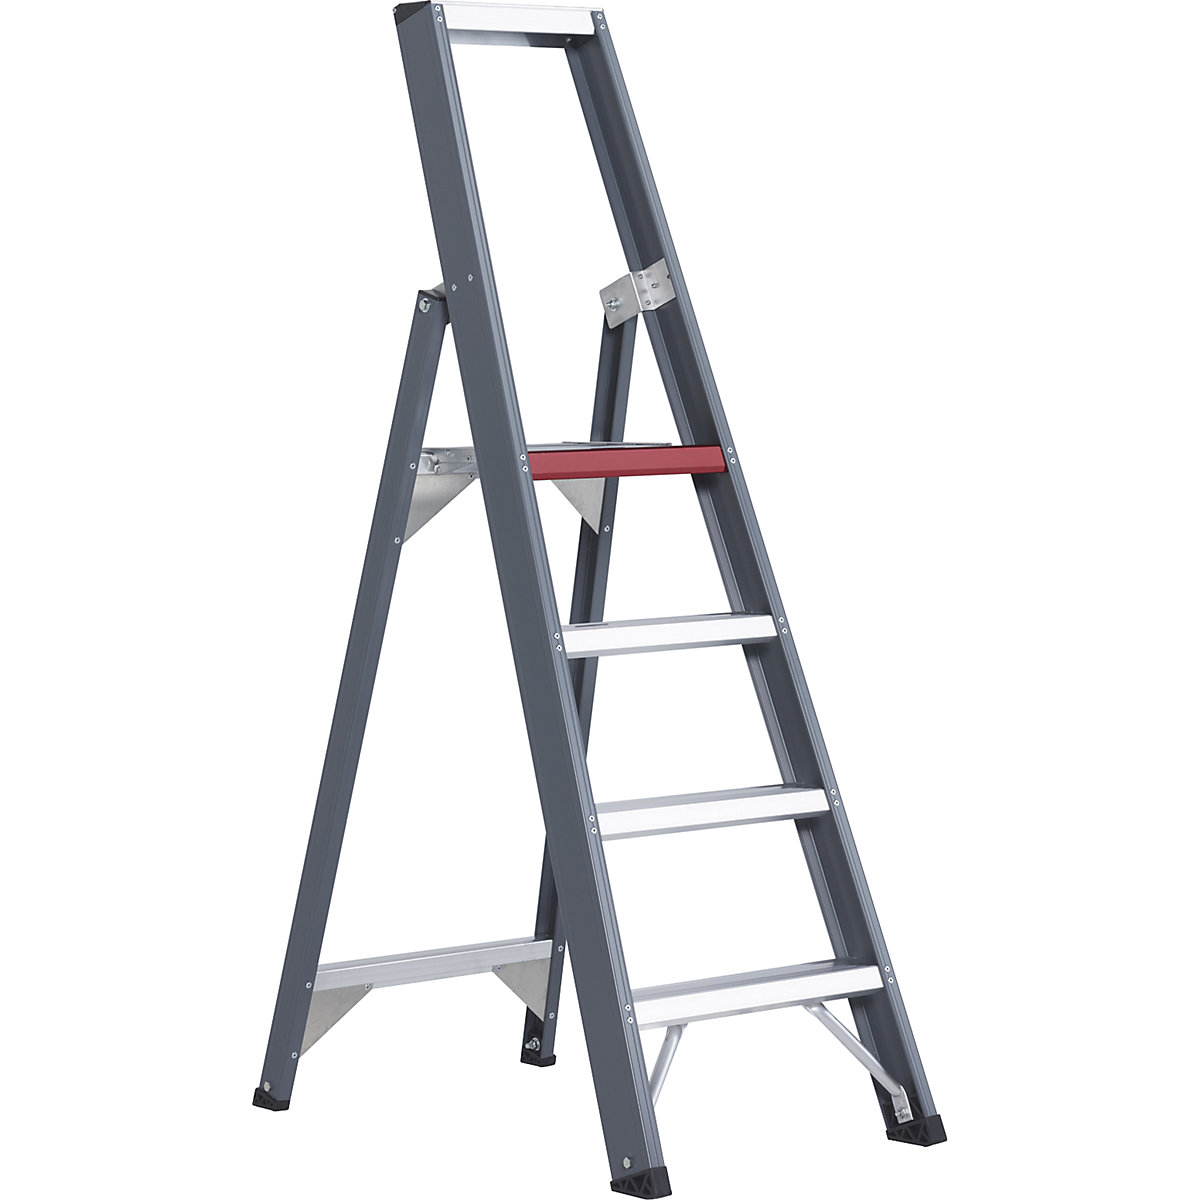 Aluminium step ladder, single sided access – Altrex, with storage tray, 4 steps, working height 2950 mm-8